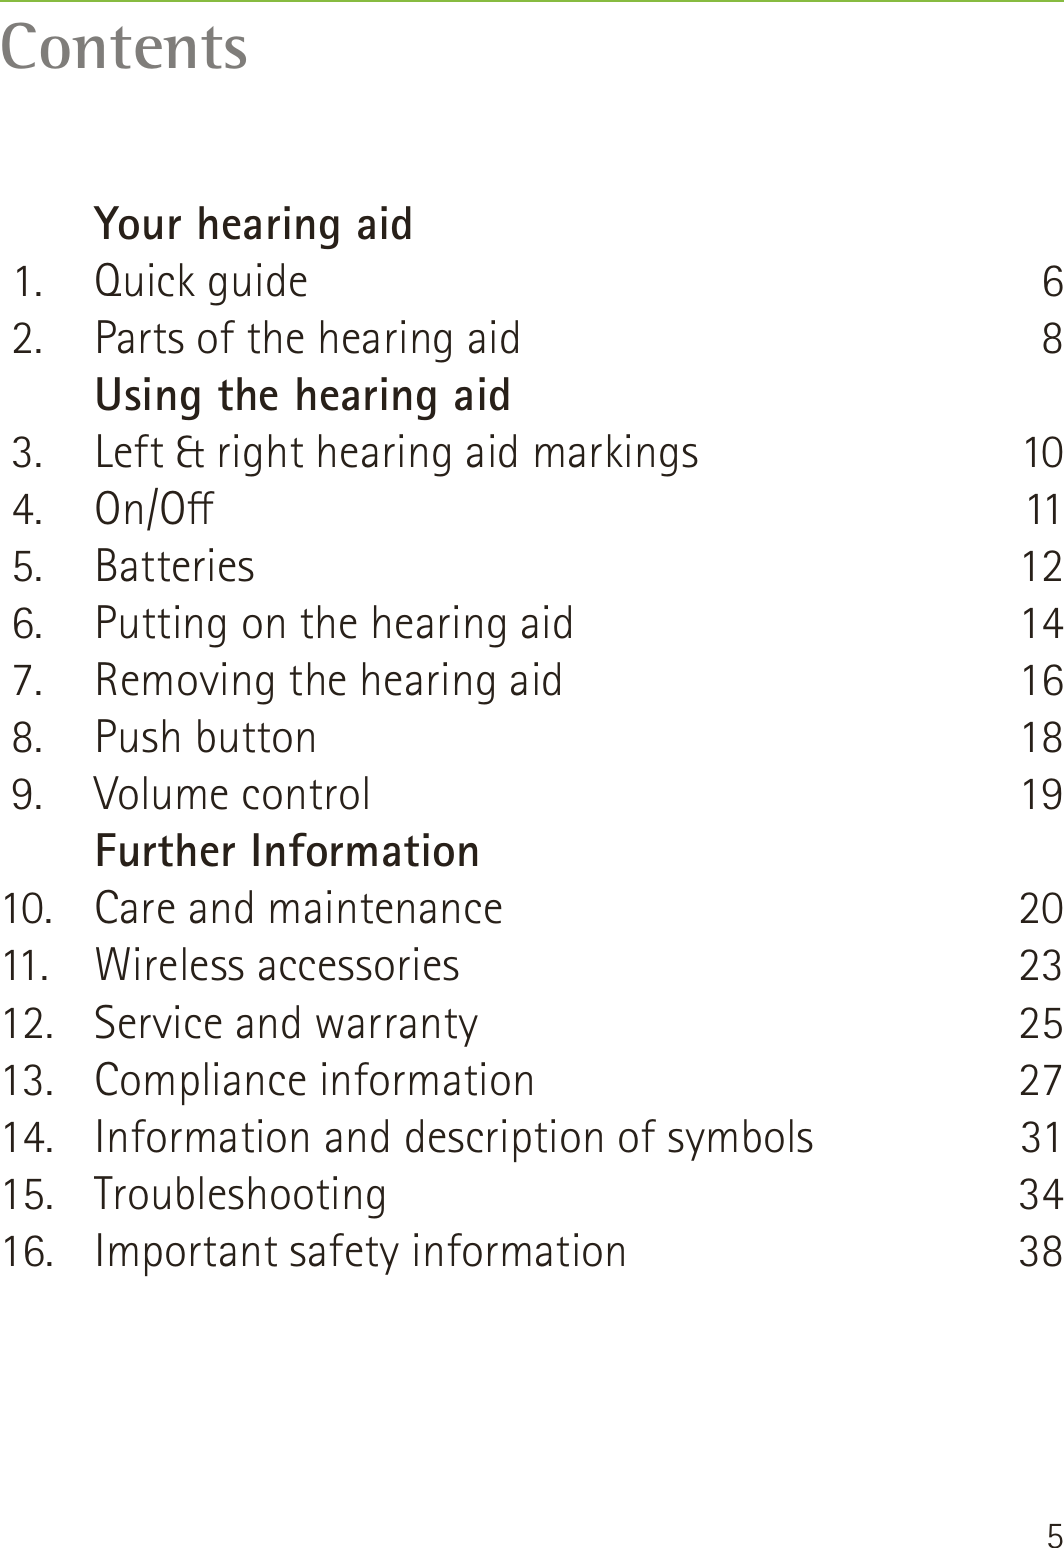 5Contents   Your hearing aid 1.  Quick guide 2.  Parts of the hearing aid   Using the hearing aid 3.  Left &amp; right hearing aid markings 4.  On/O 5.  Batteries 6.  Putting on the hearing aid 7.  Removing the hearing aid 8.  Push button 9.  Volume control   Further Information10.  Care and maintenance11. Wireless accessories12.  Service and warranty13. Compliance information14.  Information and description of symbols 15. Troubleshooting16.  Important safety information681011121416181920232527313438